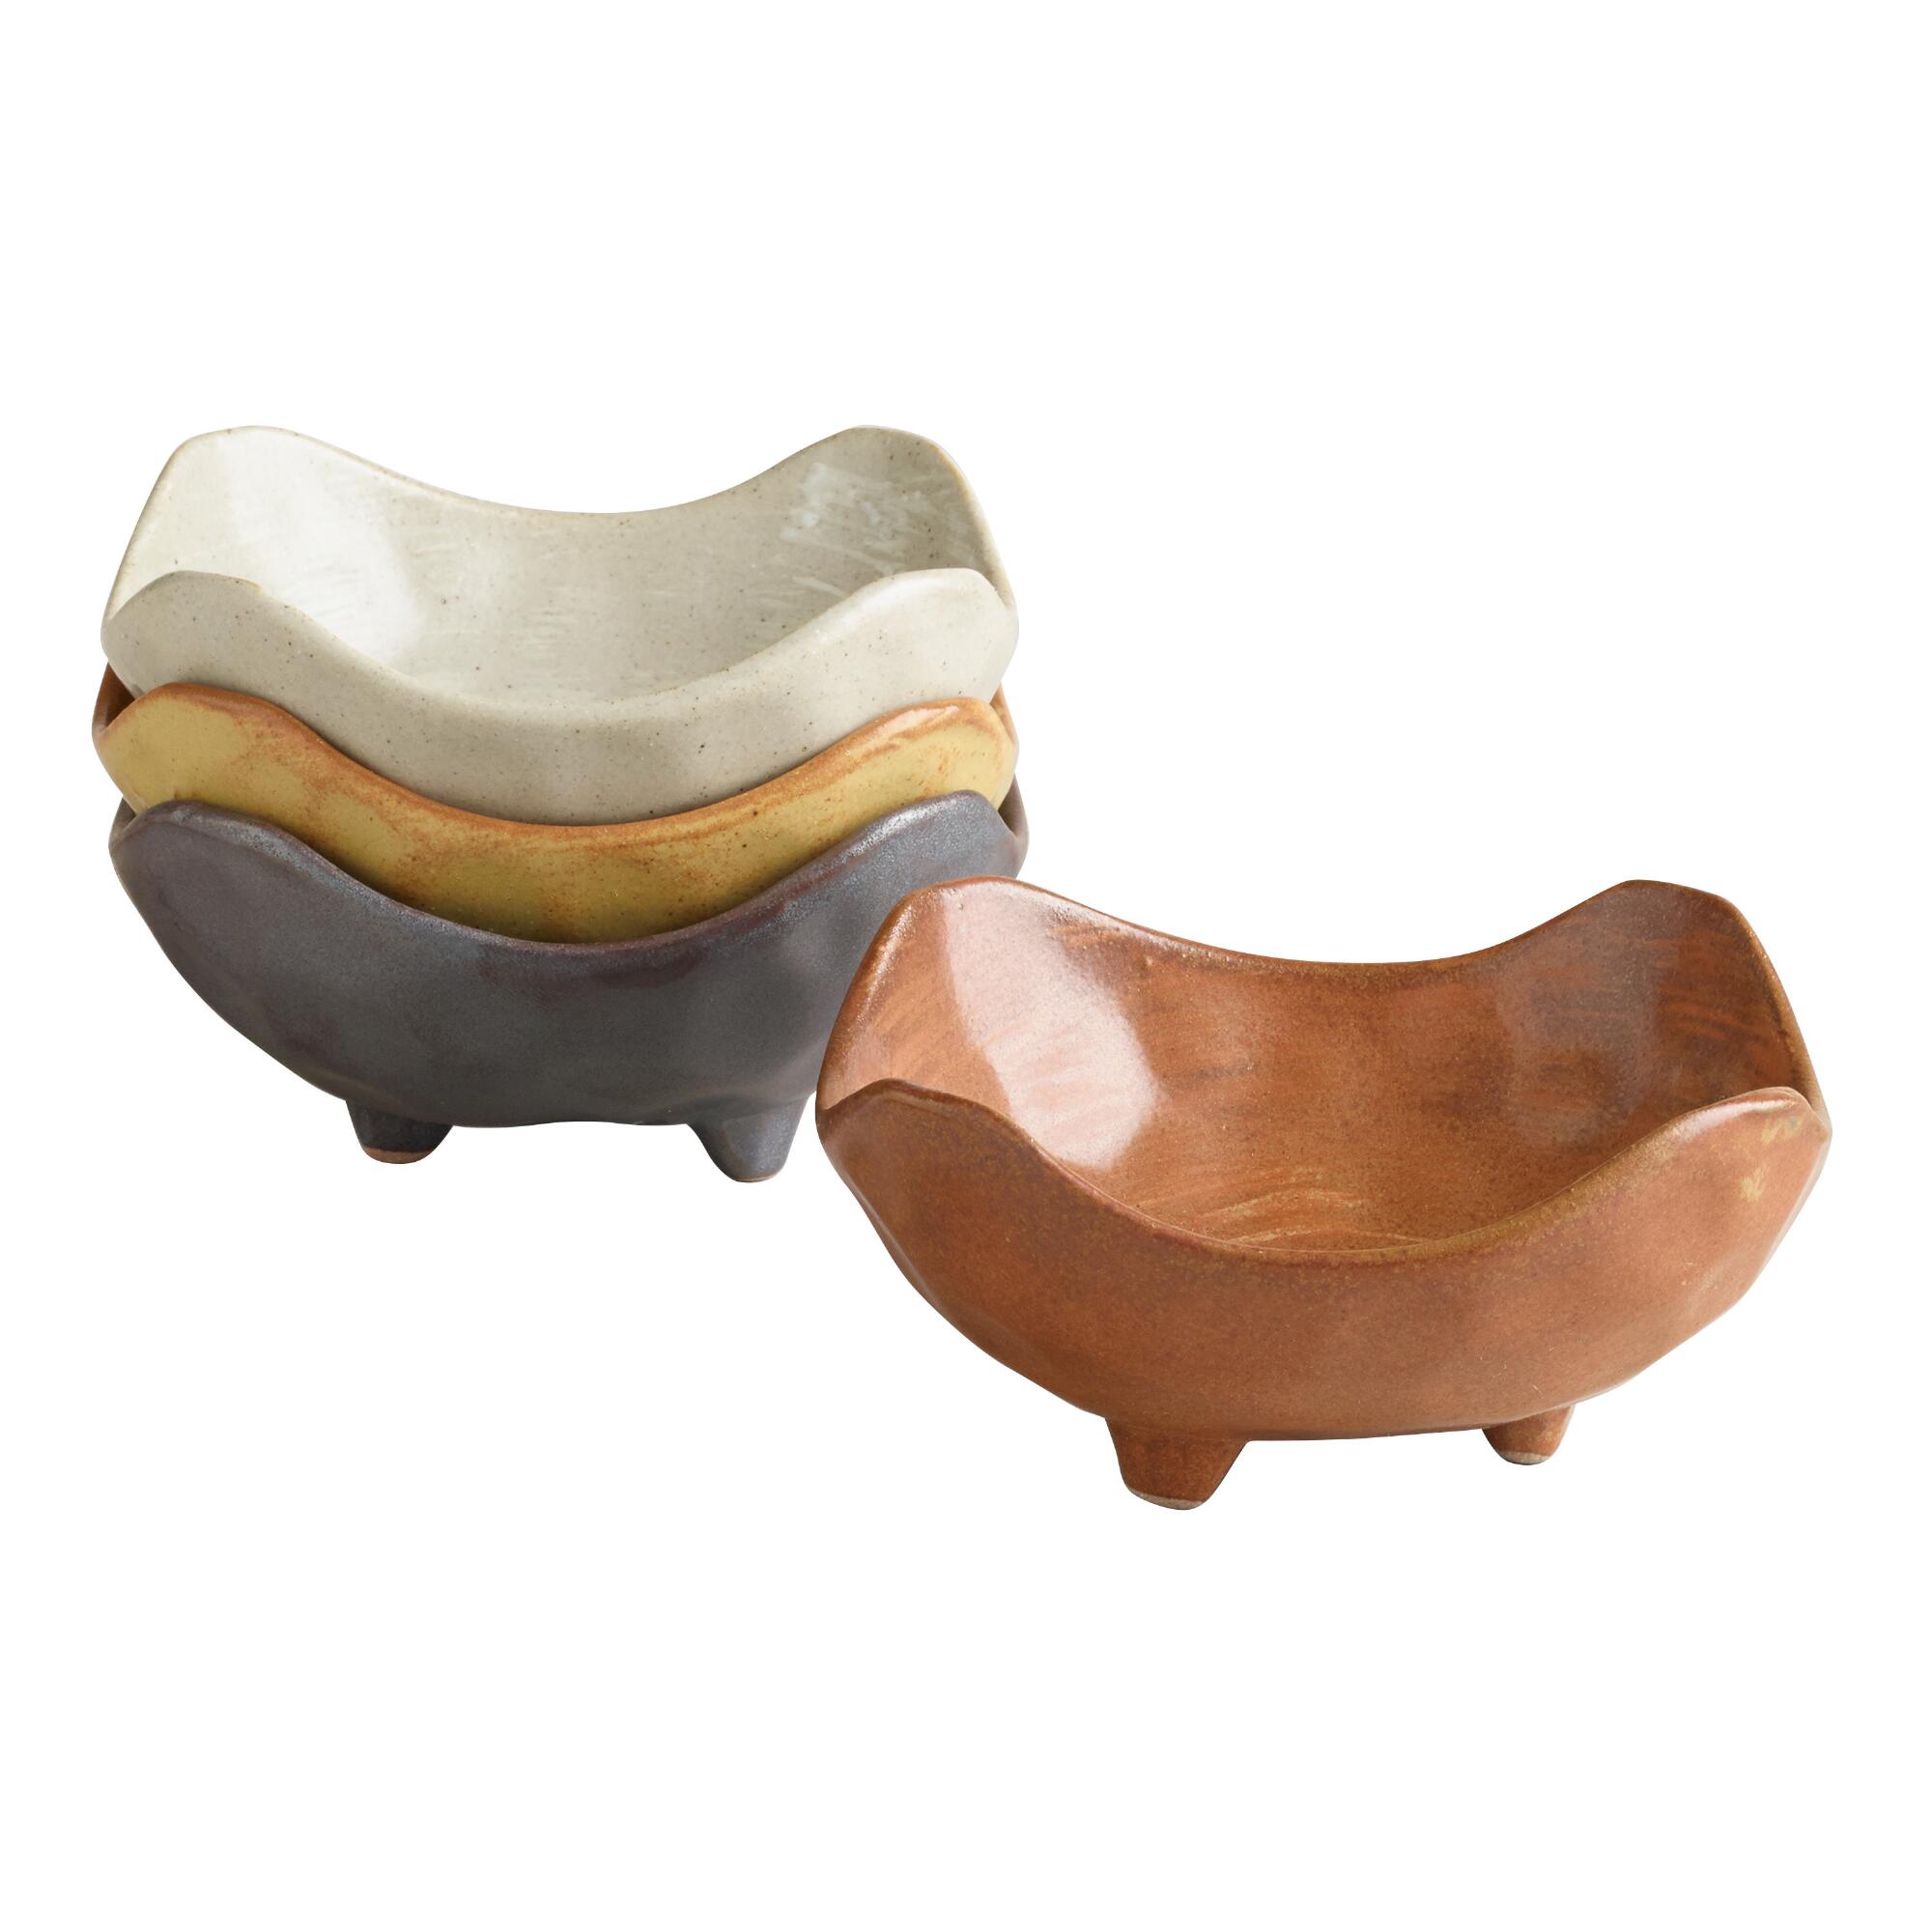 Square Fuji Footed Dishes Set Of 4: Multi - Stoneware by World Market